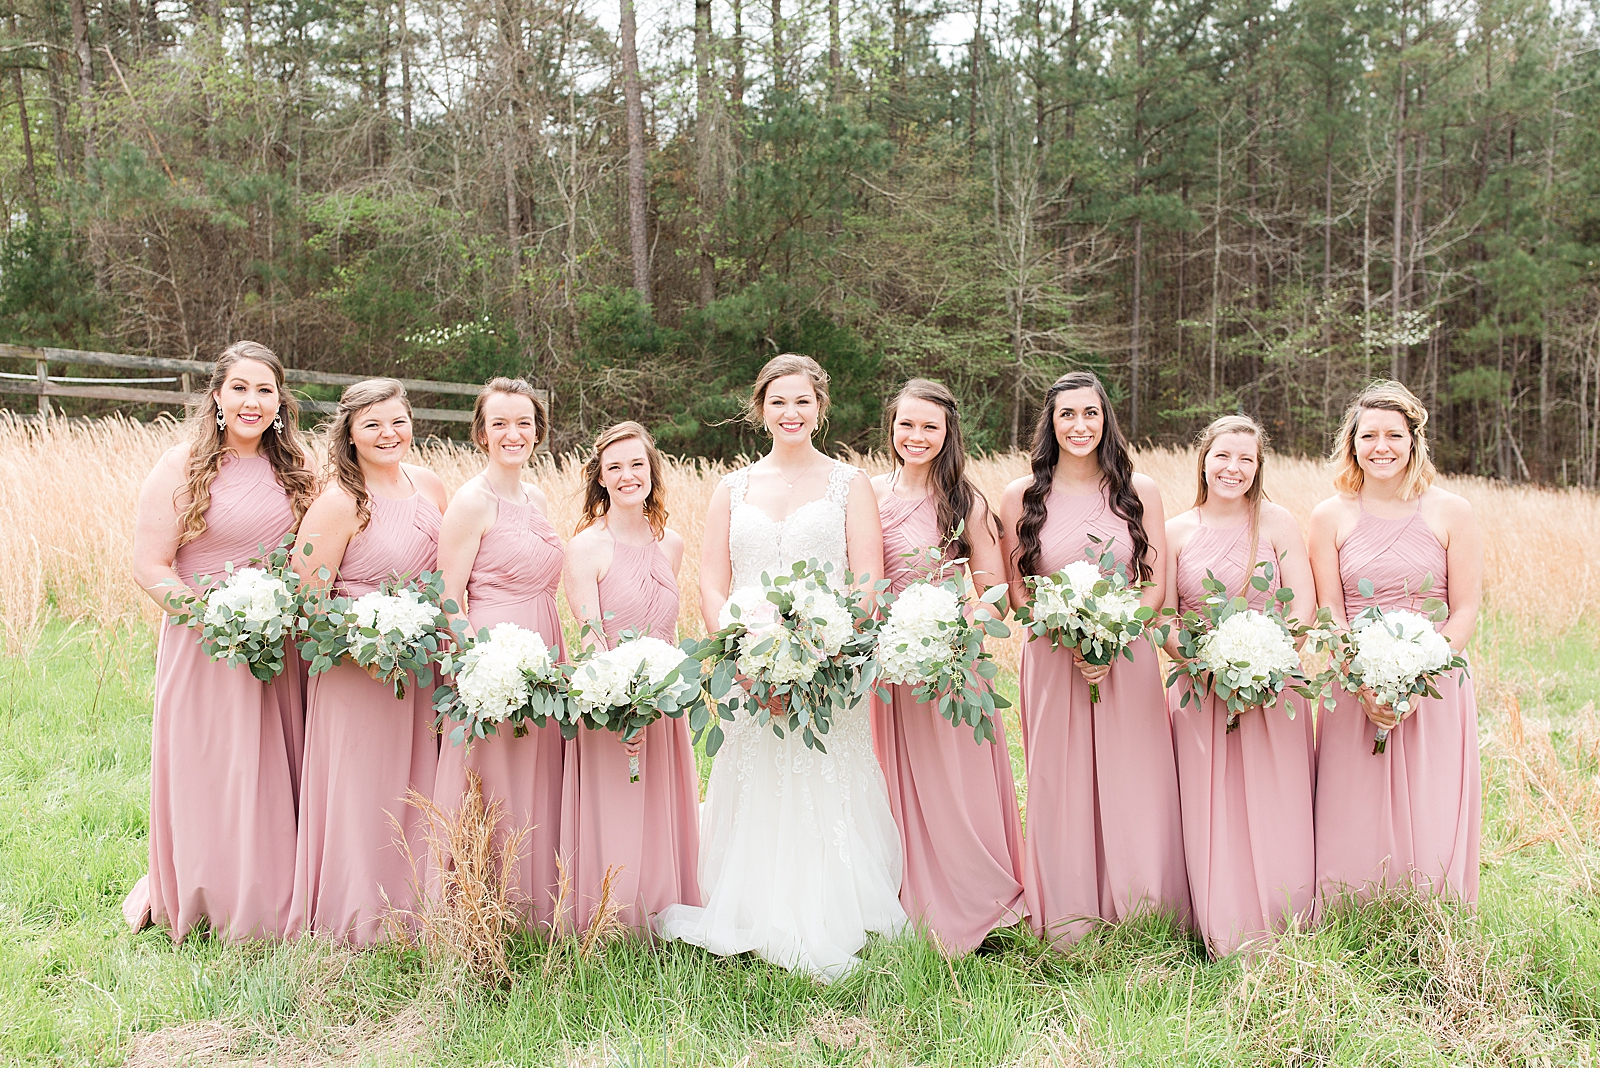 Macedonia Hills Wedding Bride with Bridesmaids in Dusty Rose and White Hydrangea Flowers Photo